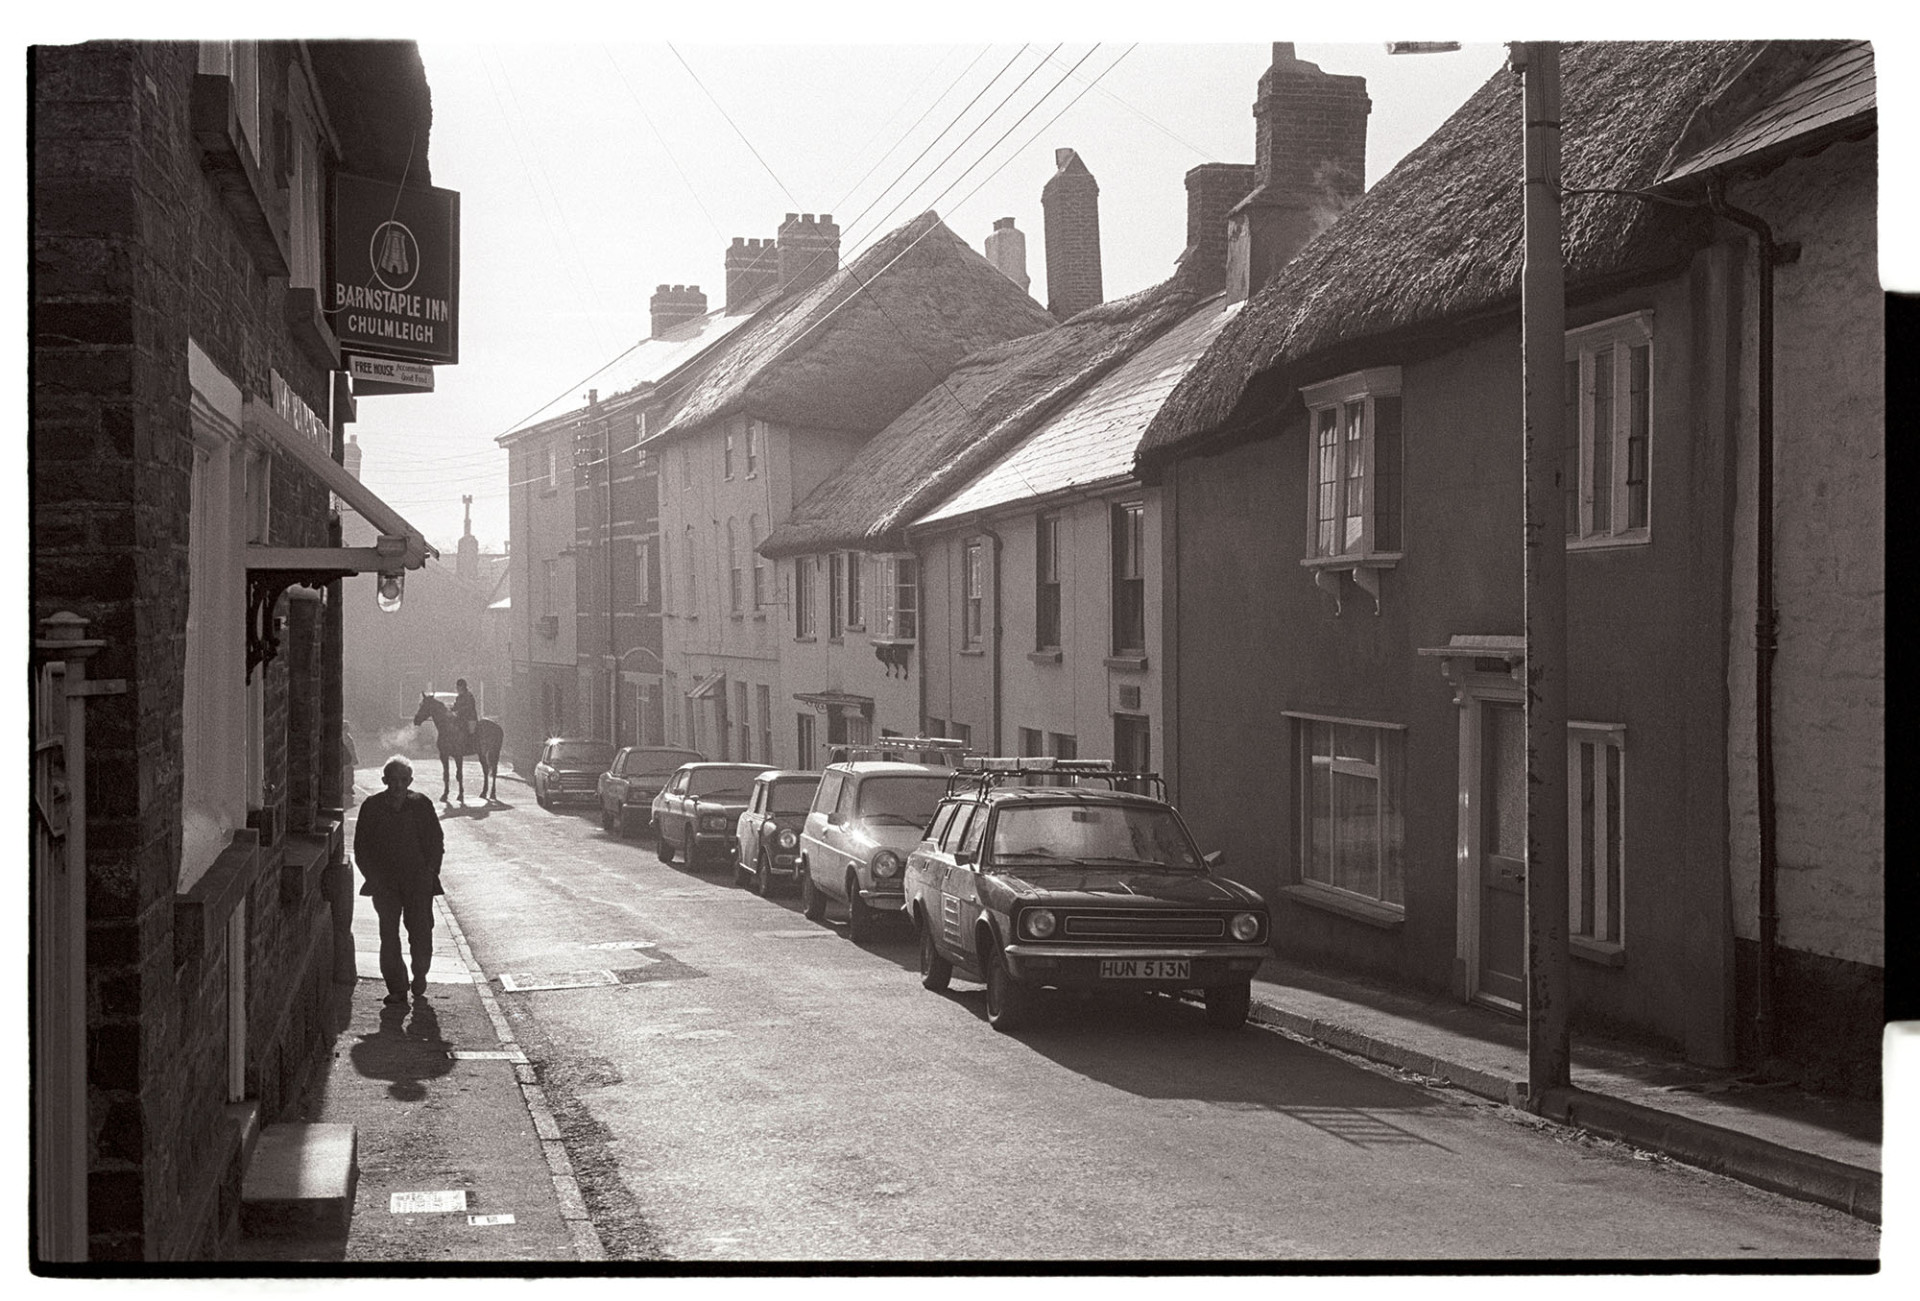 Street scene early morning with parked cars and horse rider. 
[A view of South Molton Street, Chulmleigh in the early morning. Thatched cottages, parked cars and a man walking past the Barnstaple Inn can be seen, along with a horse rider further down the street.]